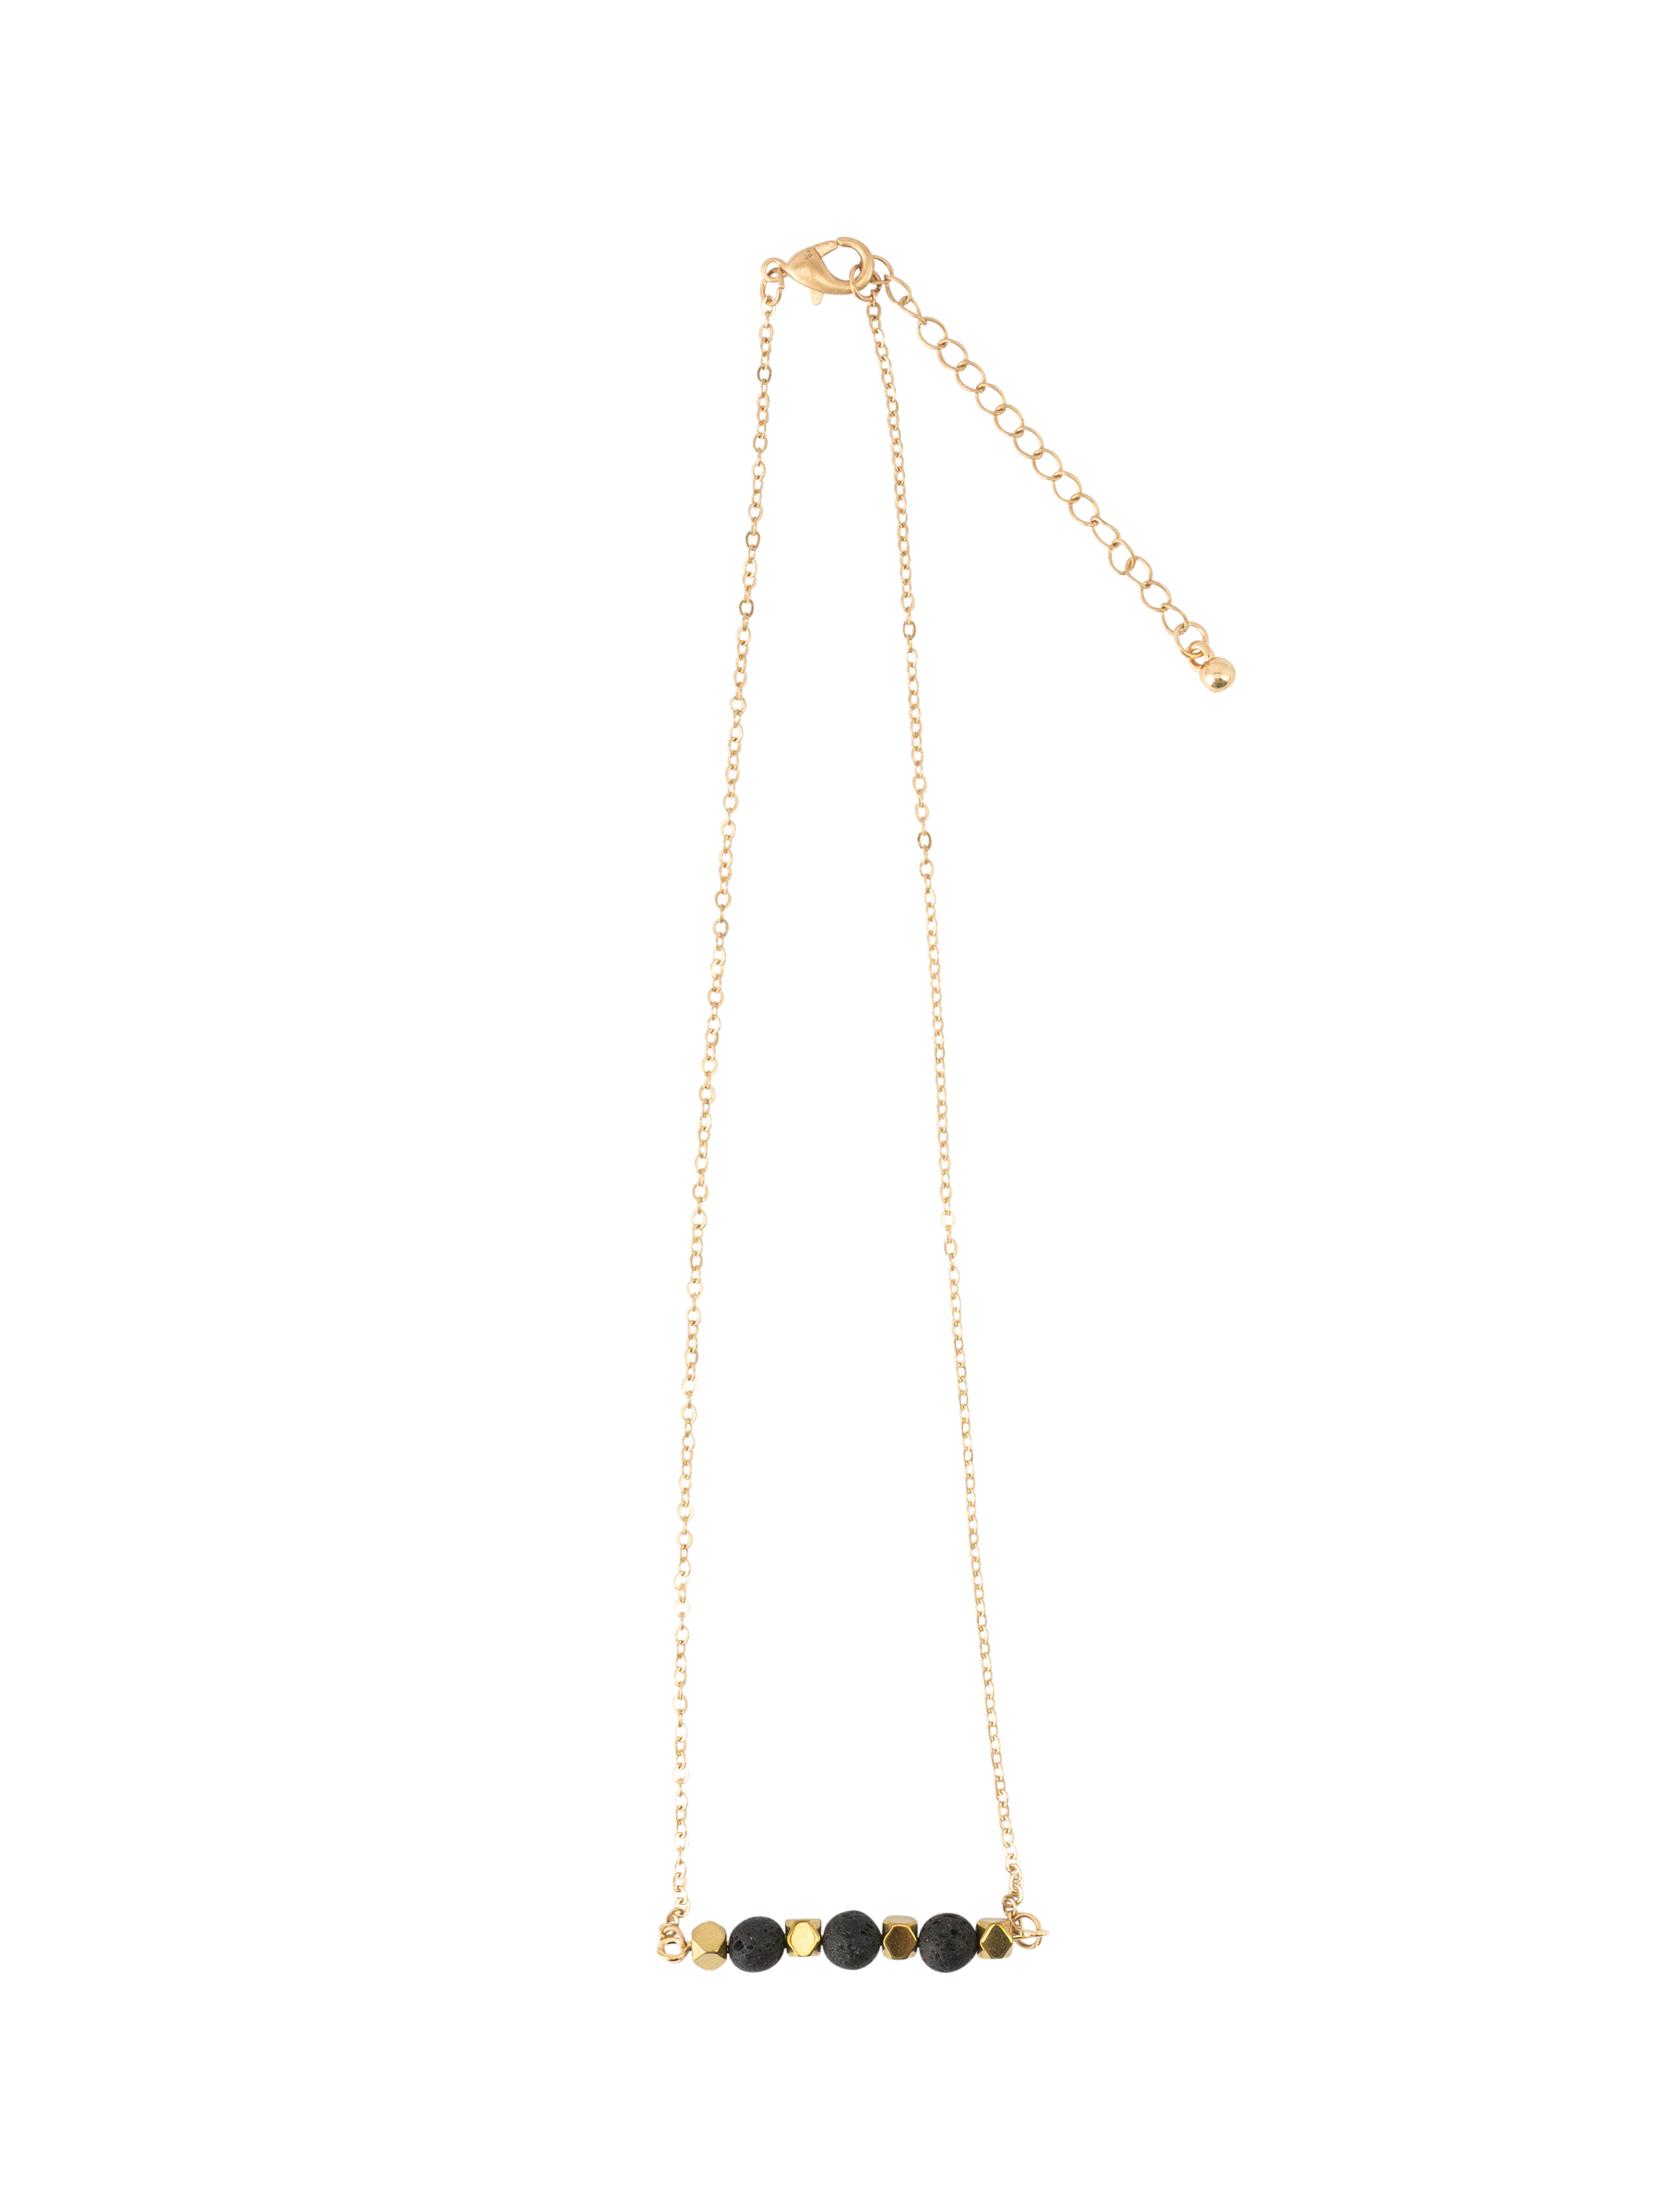 *Gold + Lava Beads Bar Necklace